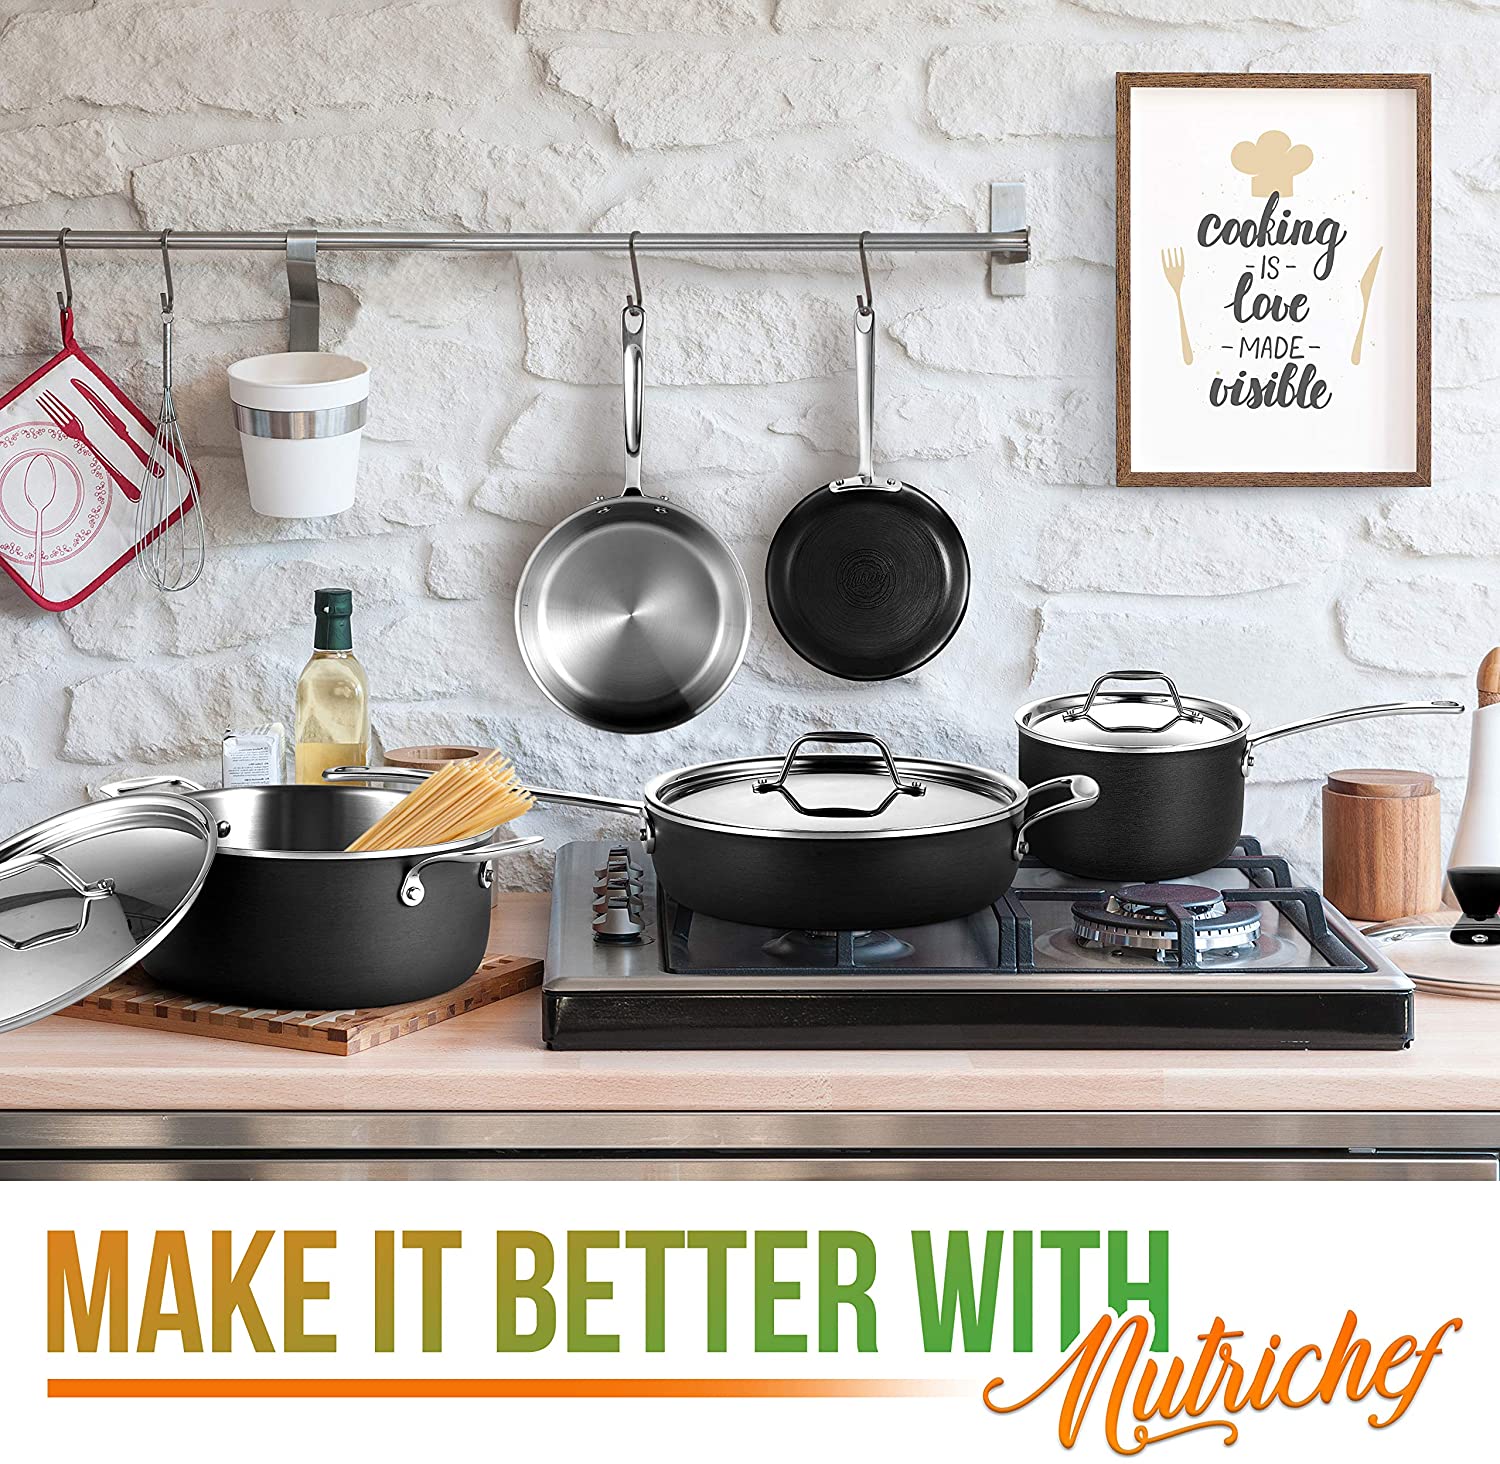 NutriChef Cookware Reviews